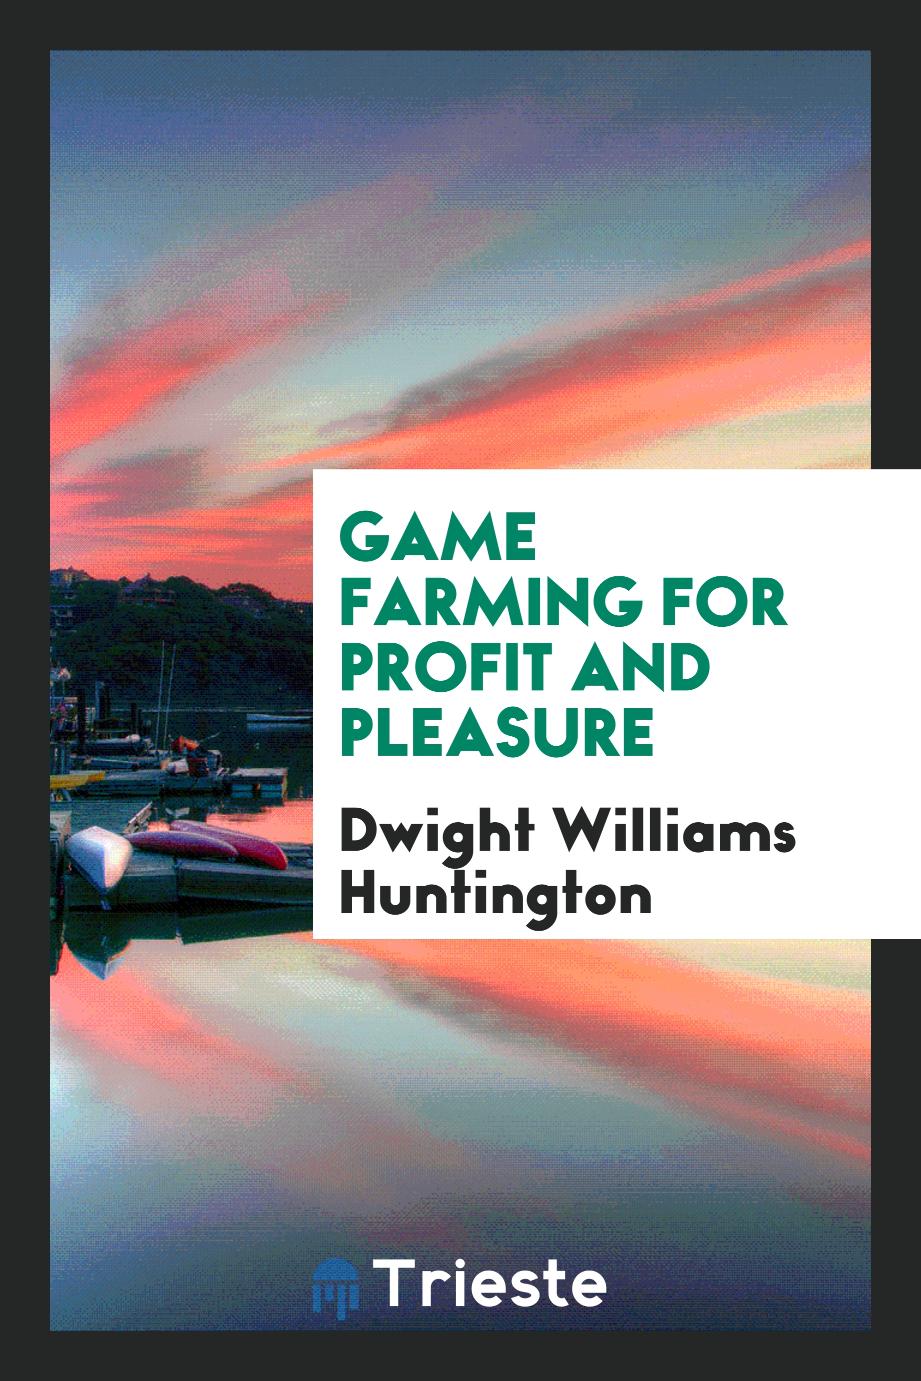 Game Farming for Profit and Pleasure